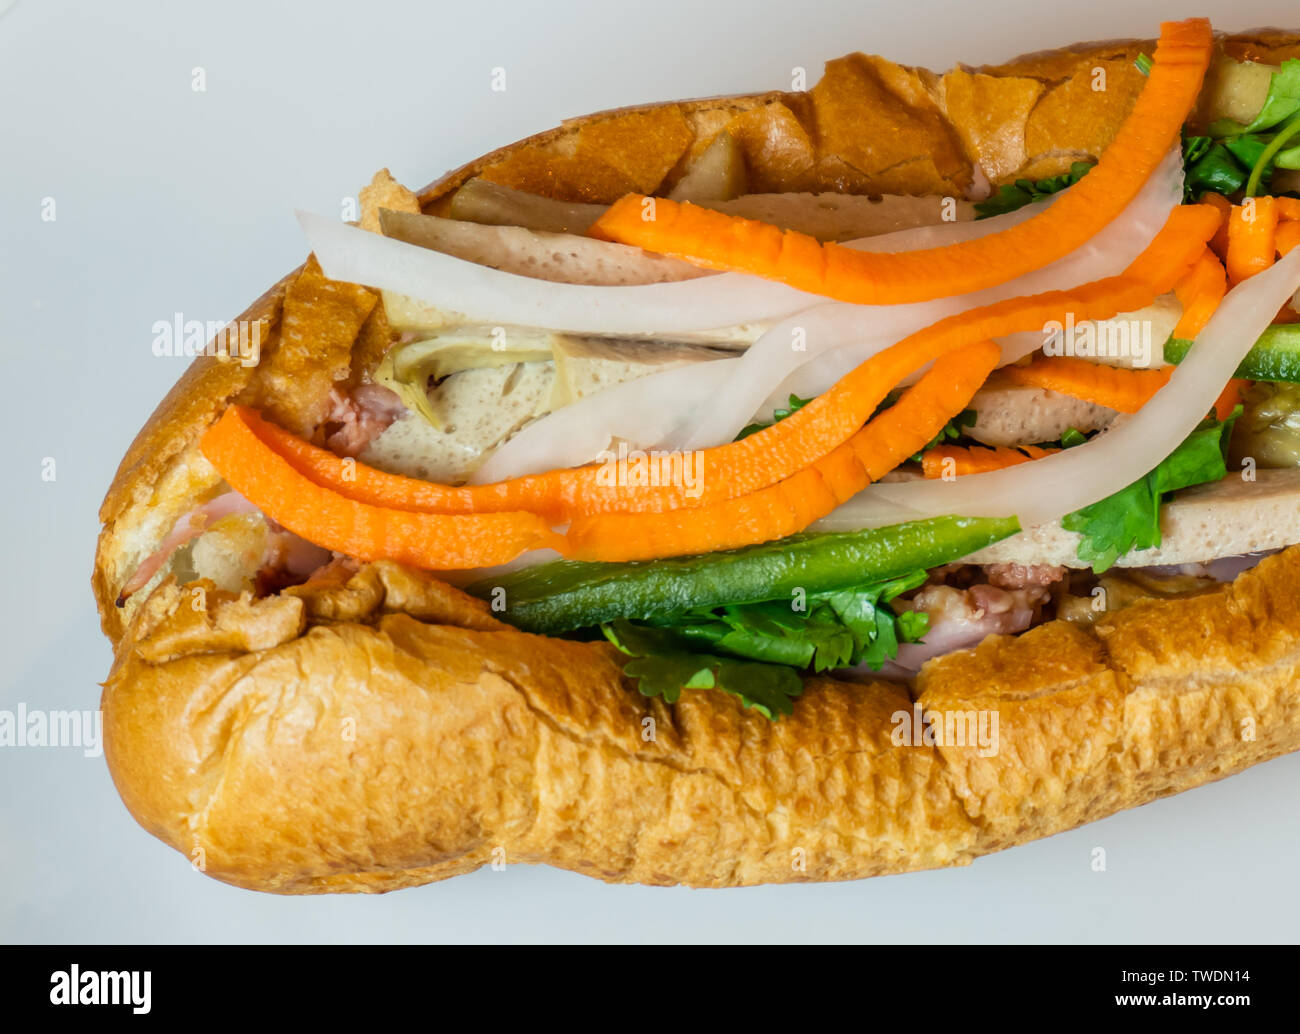 Close up shot of a traditional Banh Mi Sandwich. Banh Mi Sandwiches came from the influence of the French colonization in the mid 19th century. Stock Photo